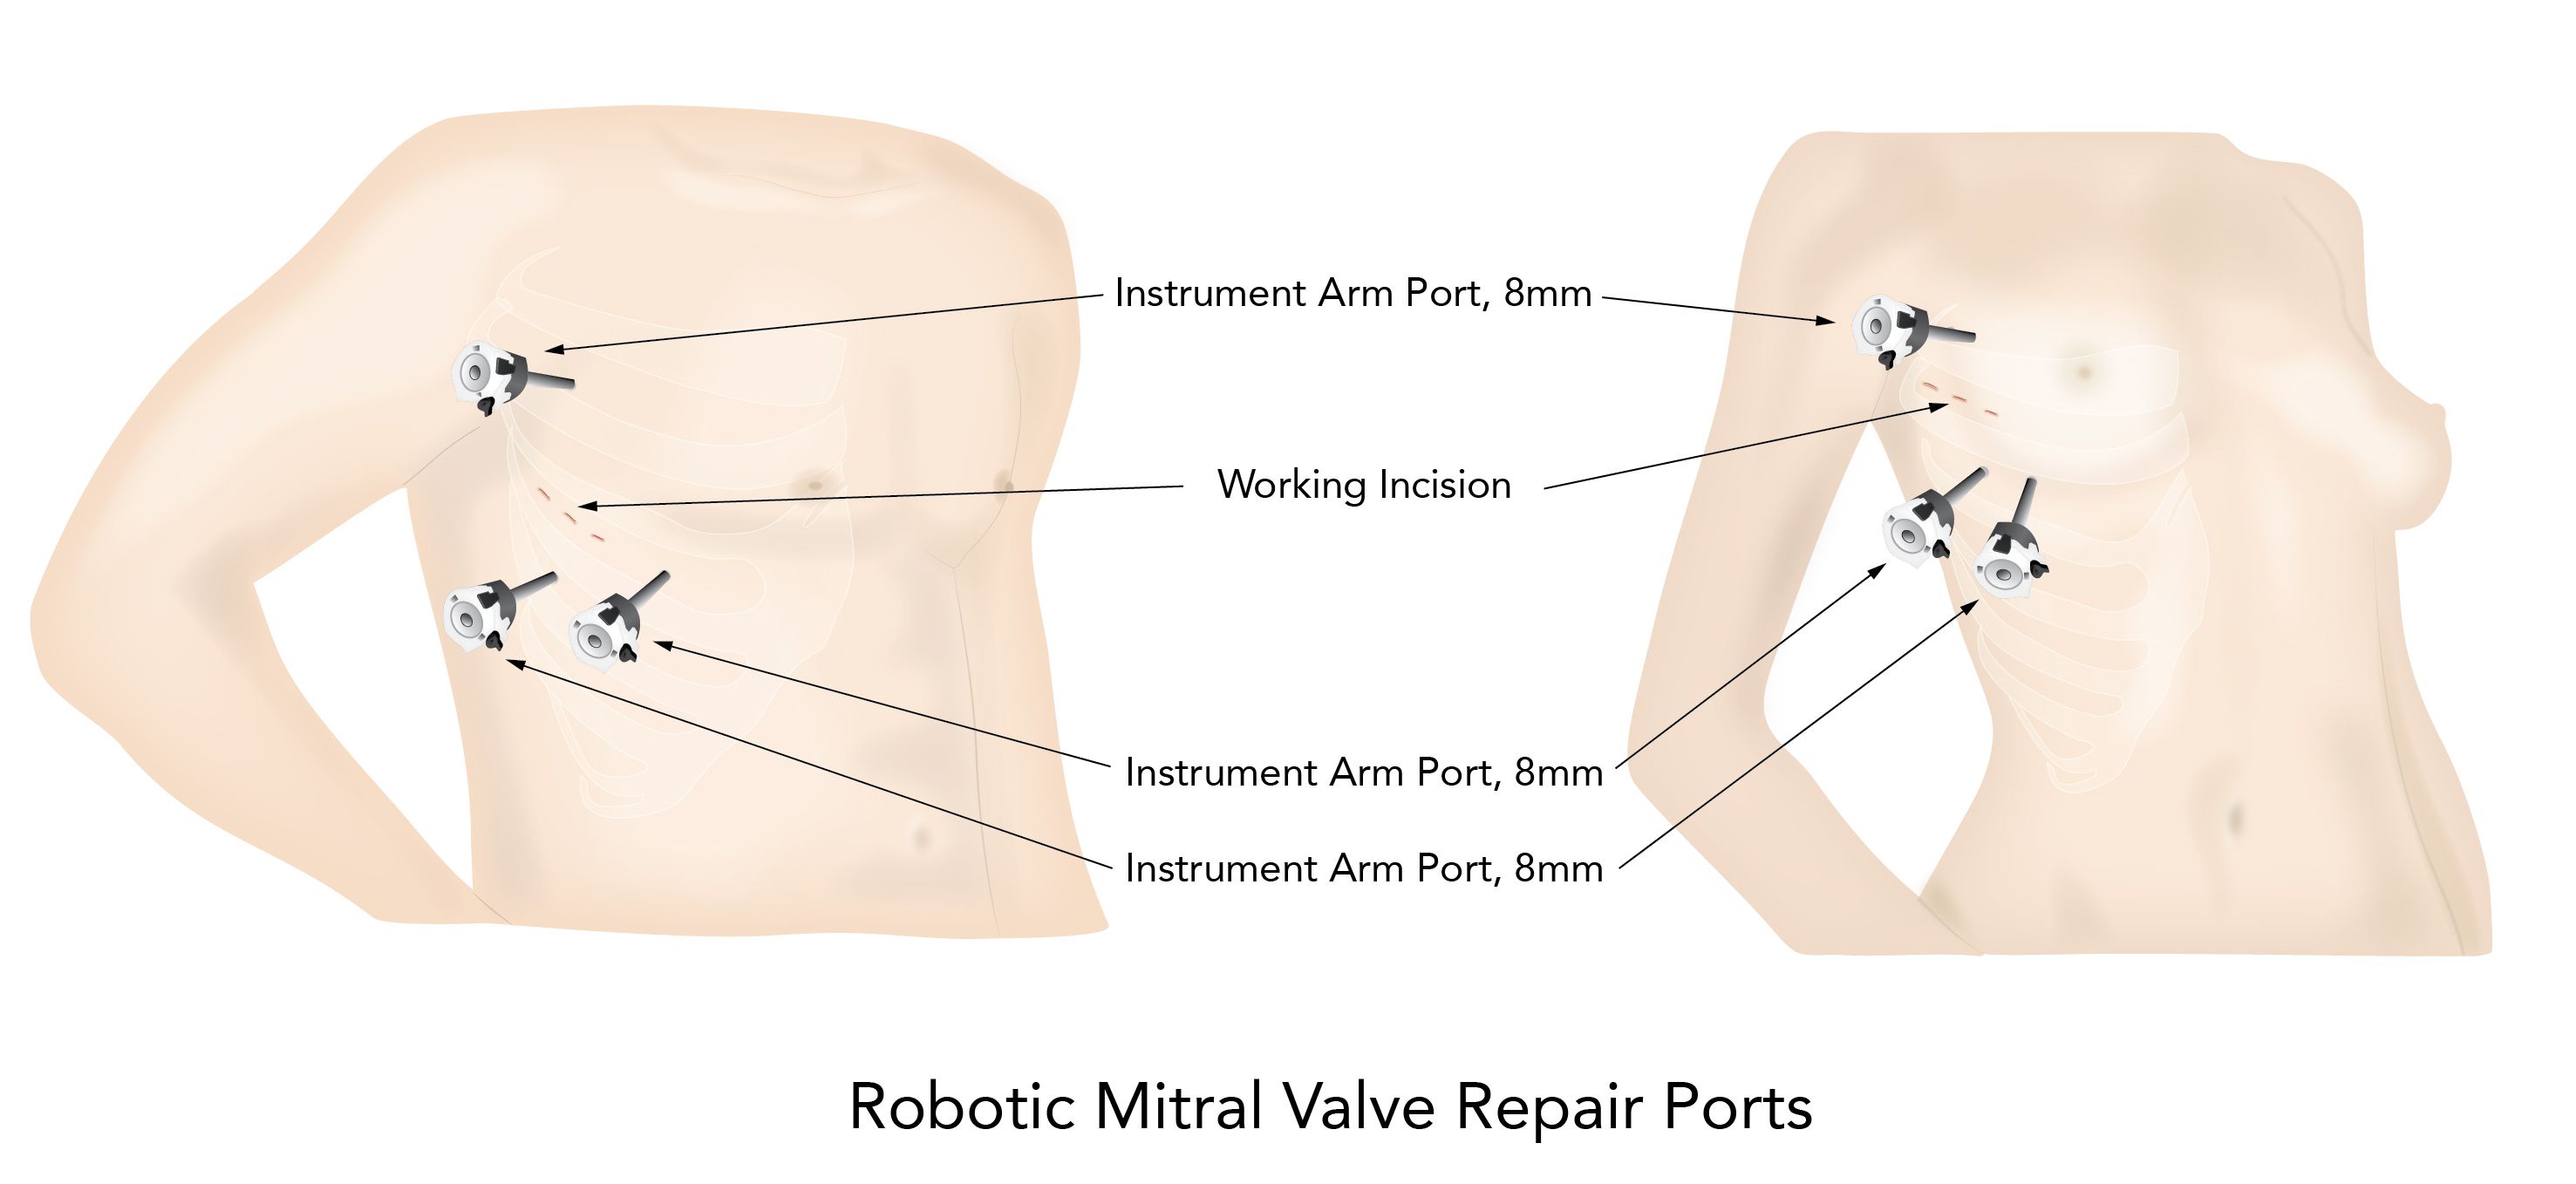 Robotic mitral valve repair and replacement, robotic heart surgery, minimally invasive surgery, stephanie mick, 